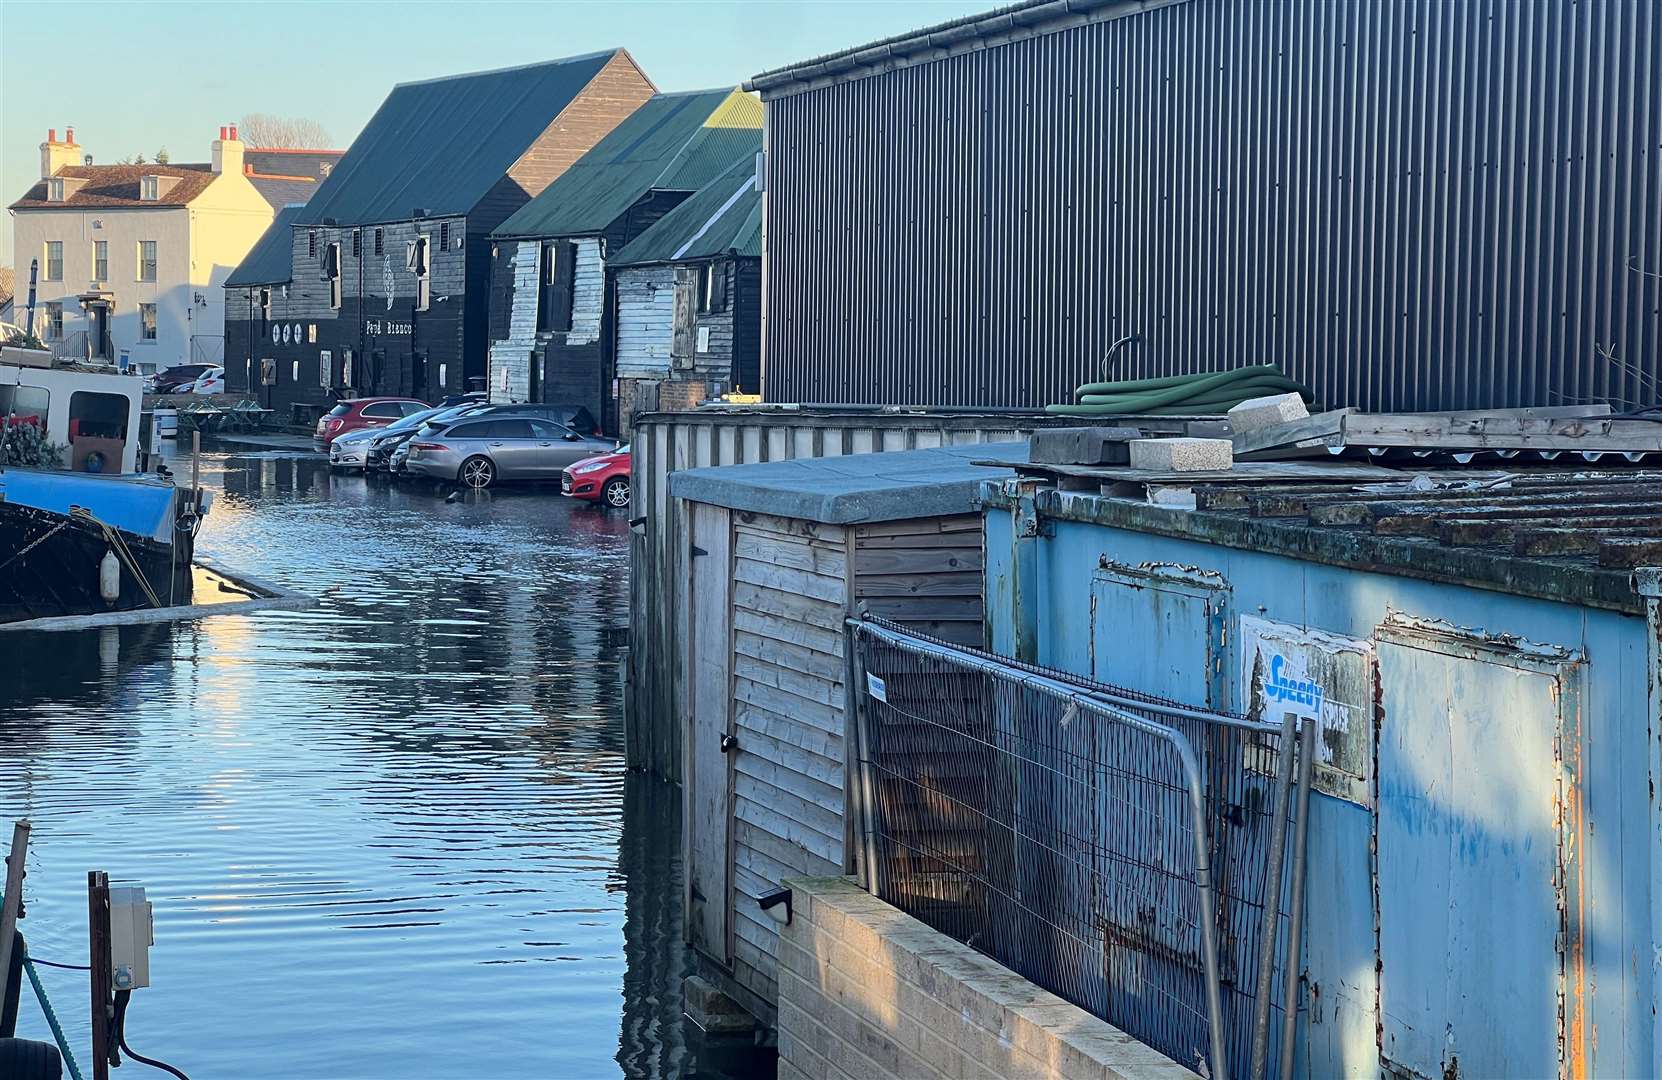 Flooding this afternoon at the Standard Quay in Faversham